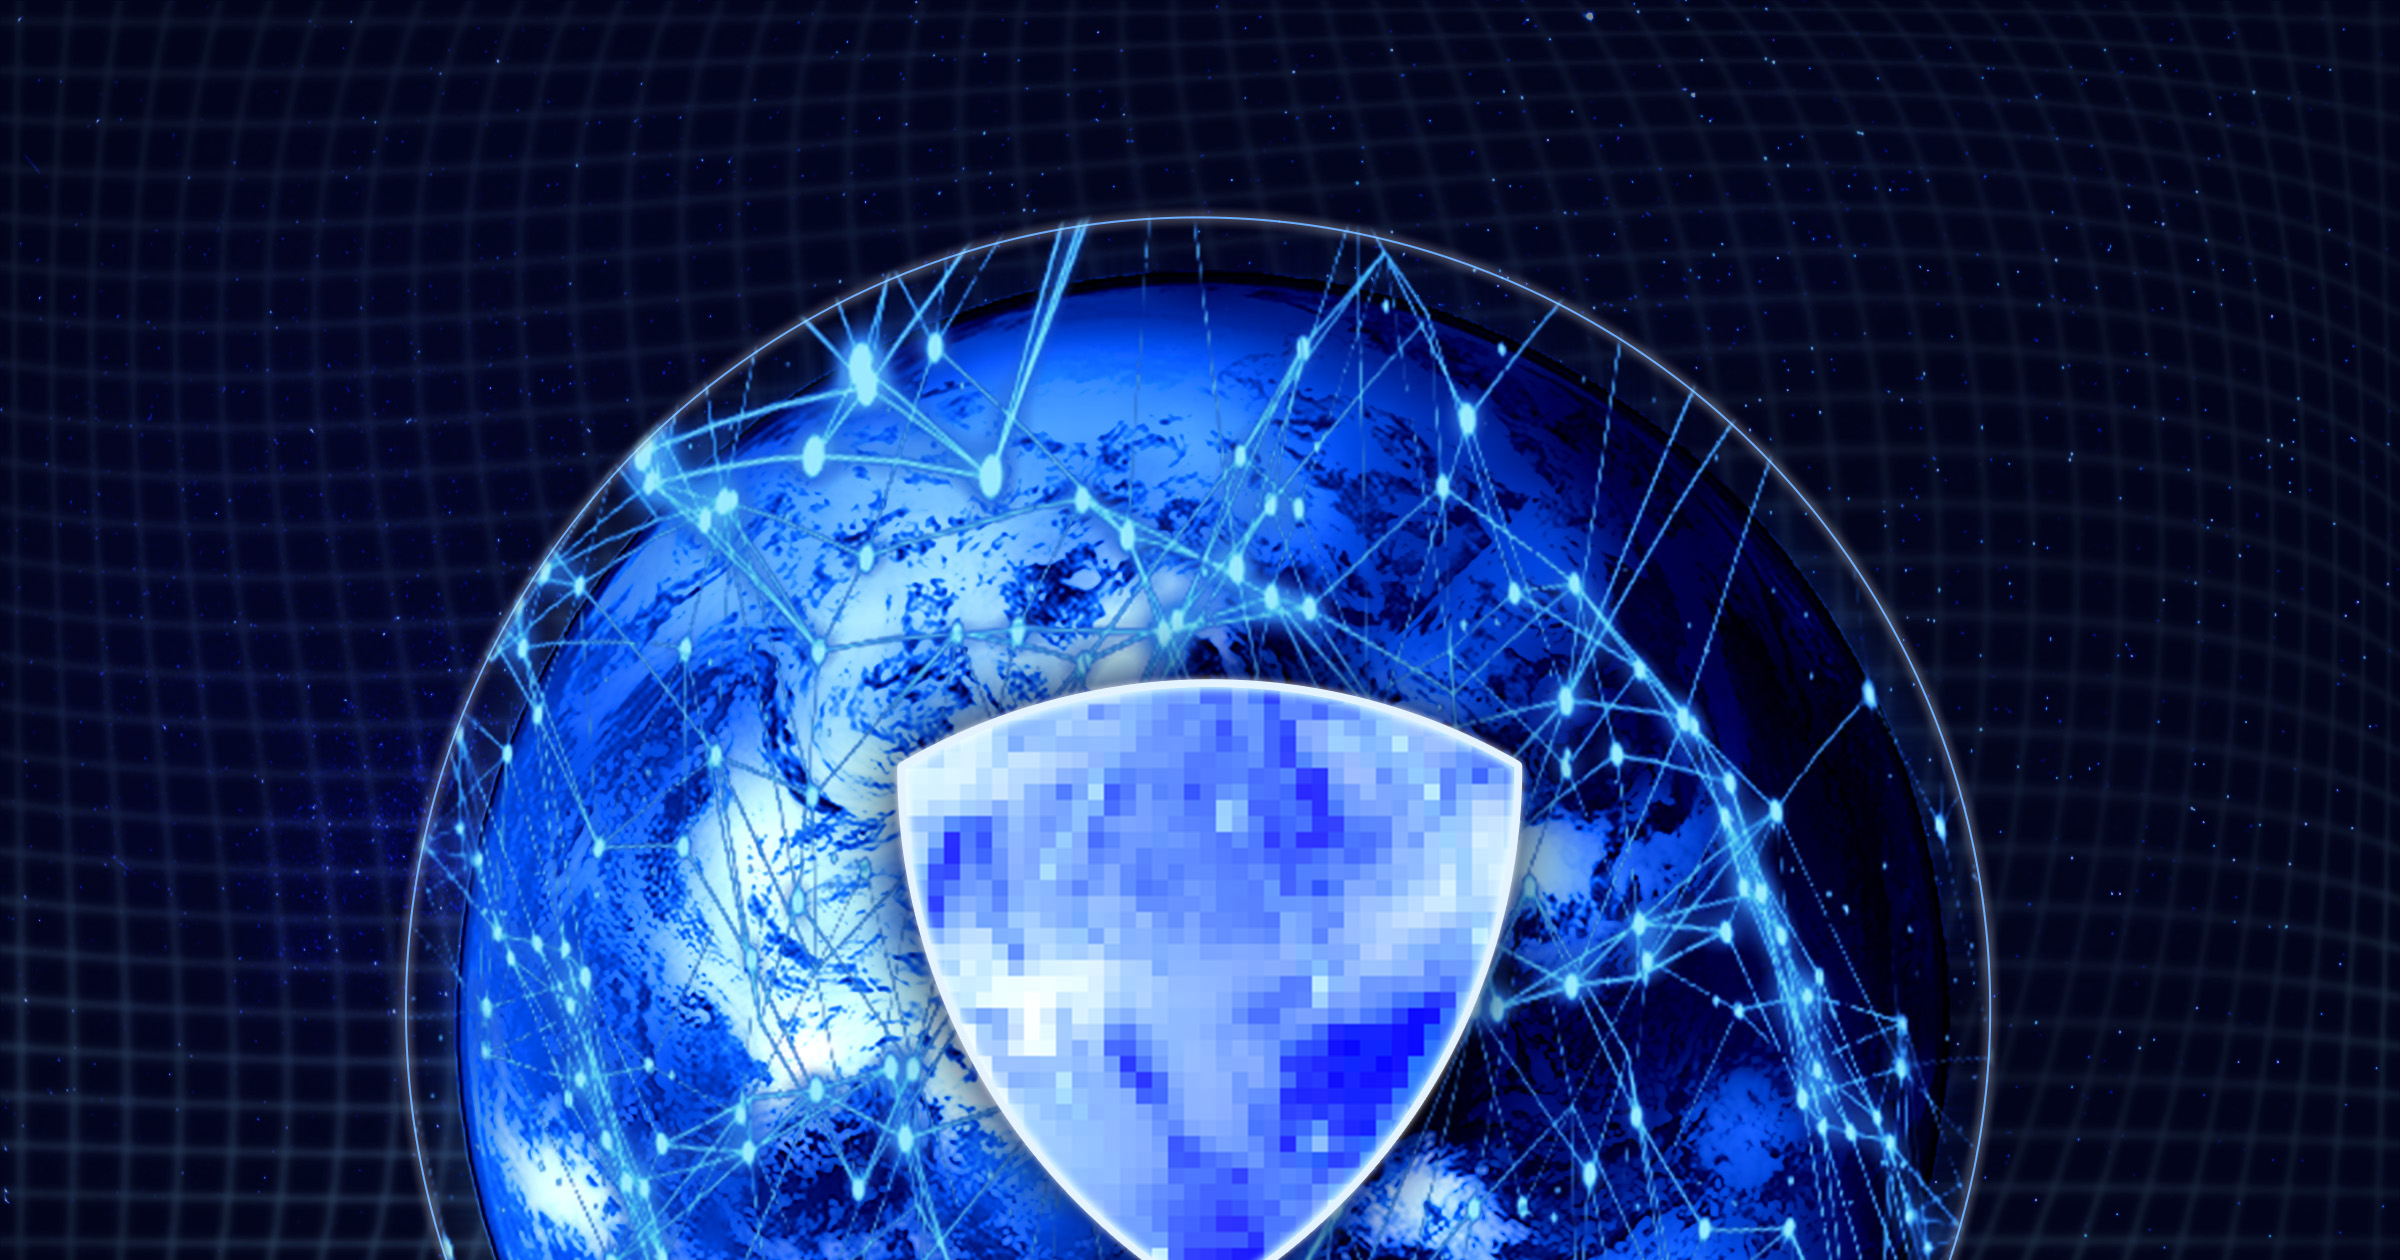 A security shield implemented in the network wrapping the earth